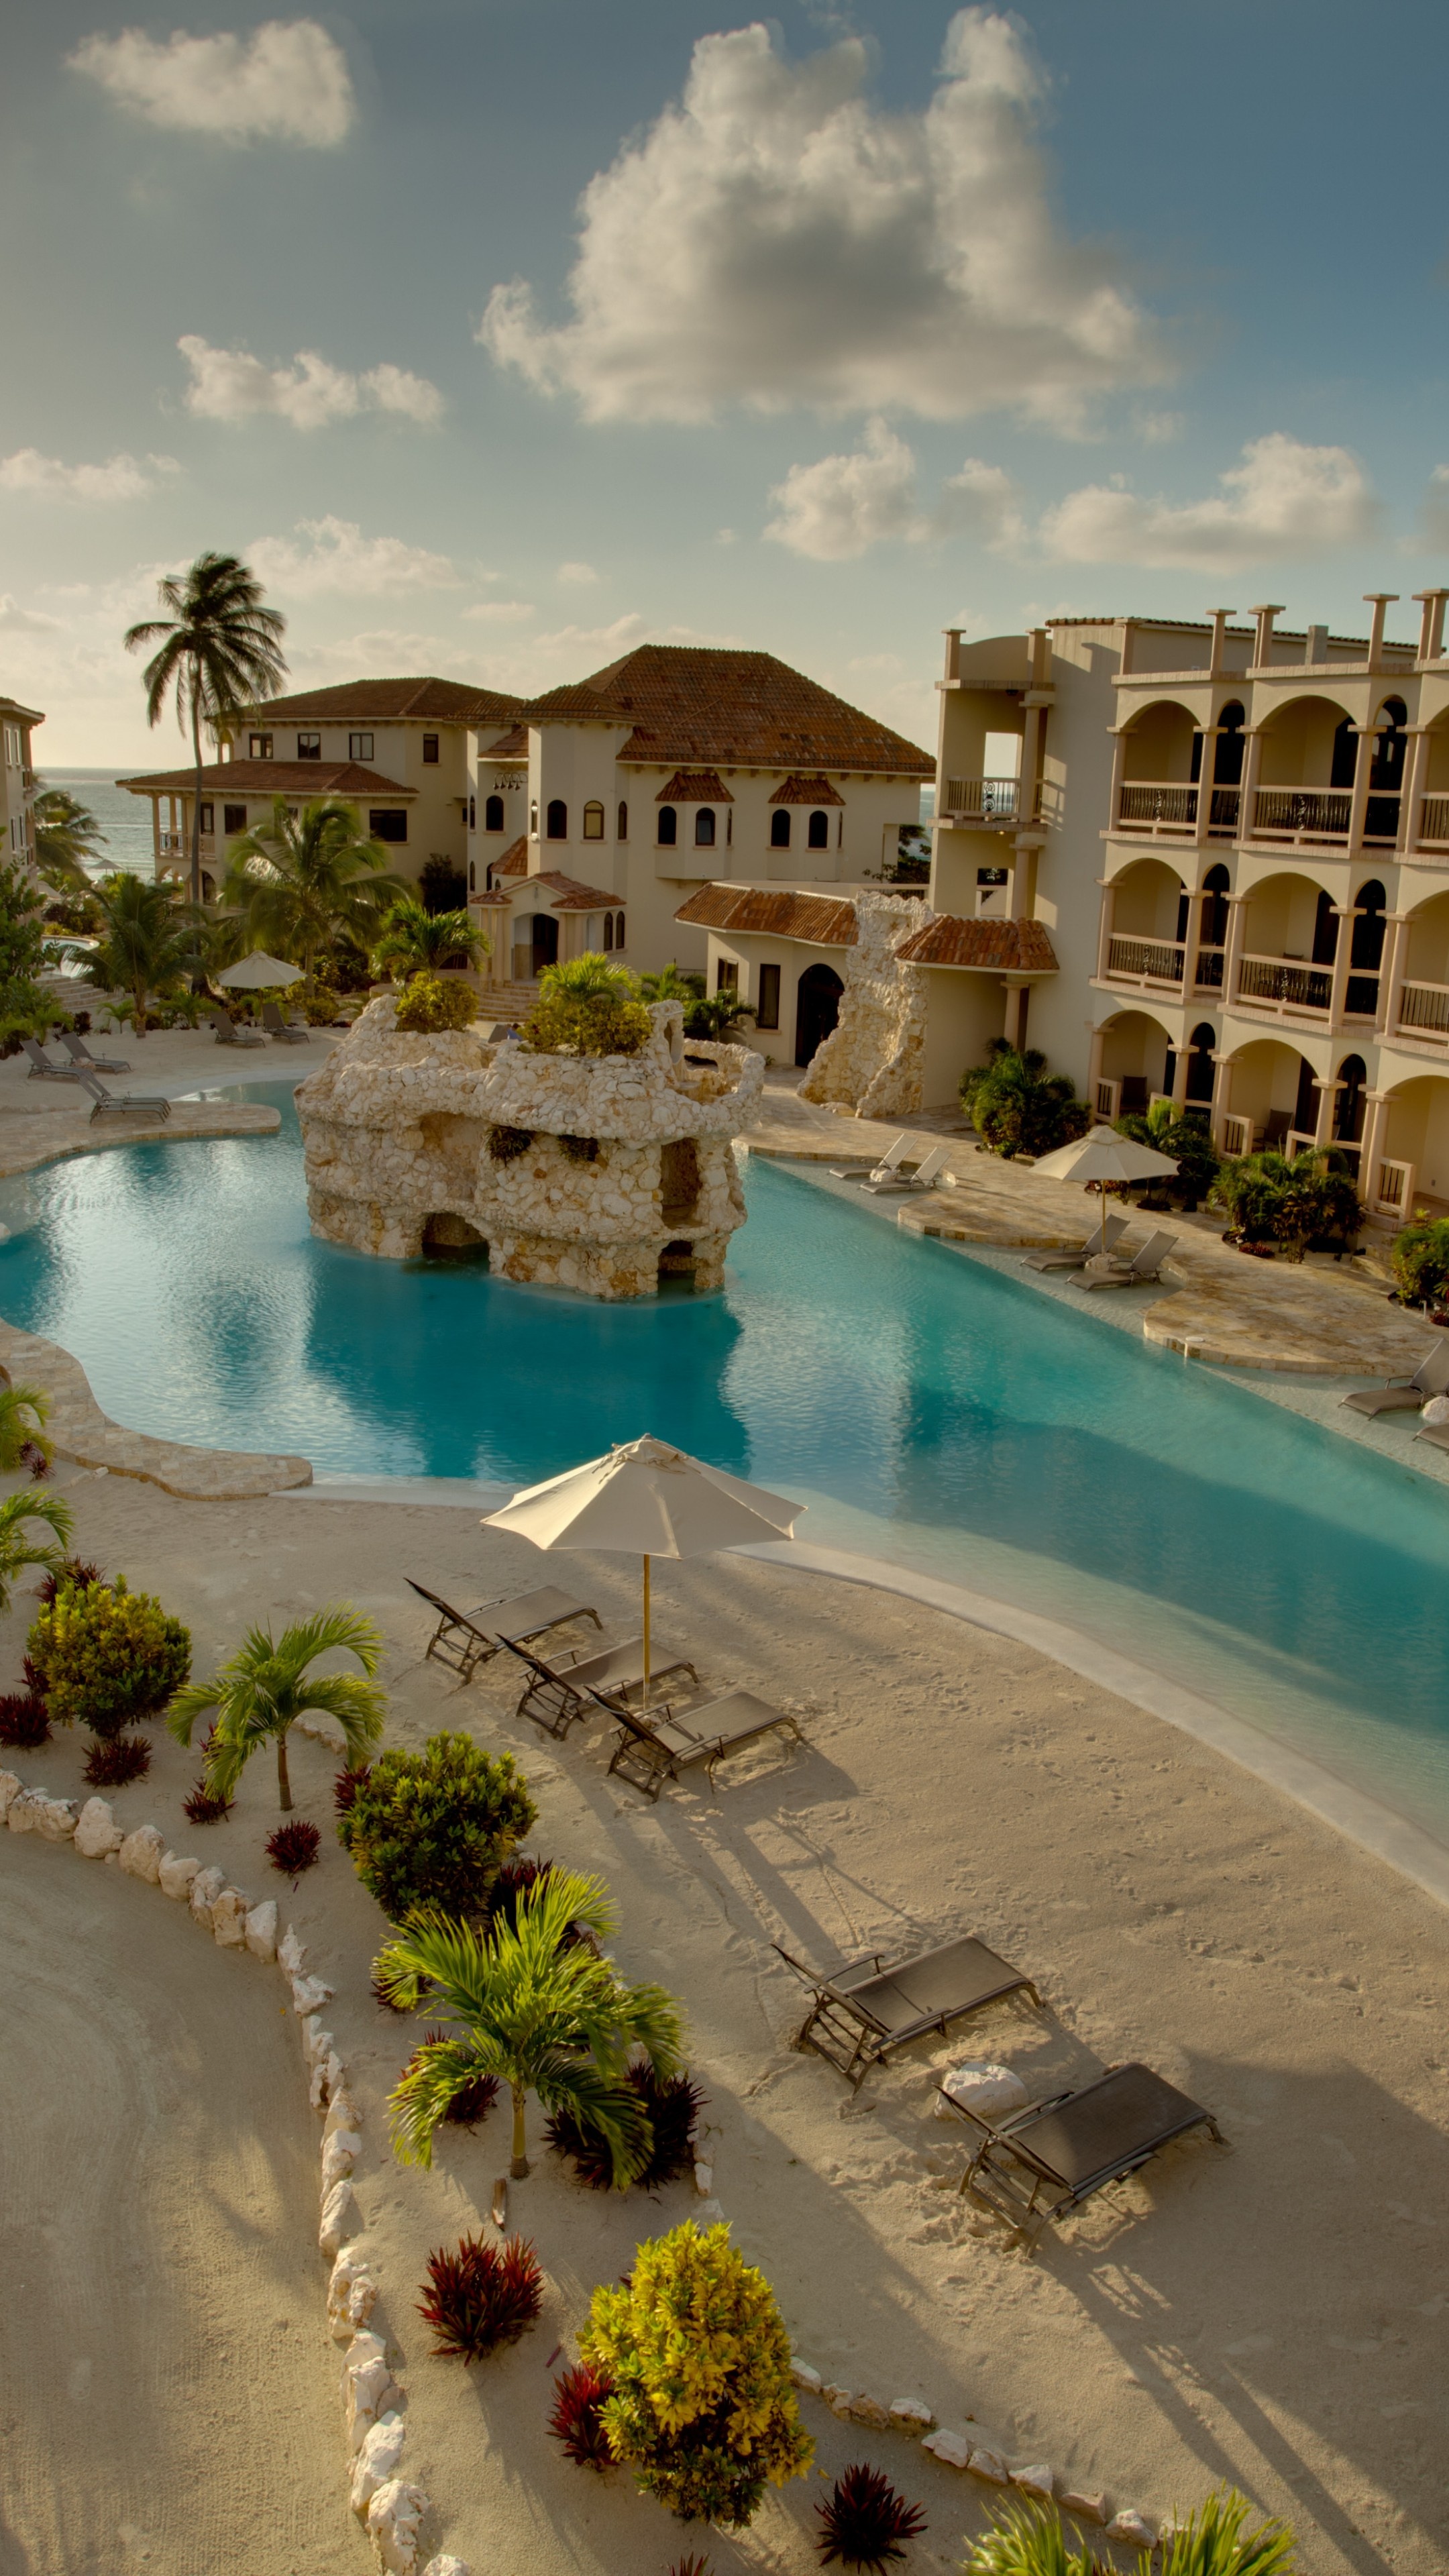 Belize resort getaway, Relax by the pool, Sun-kissed paradise, Architectural beauty, 2160x3840 4K Handy